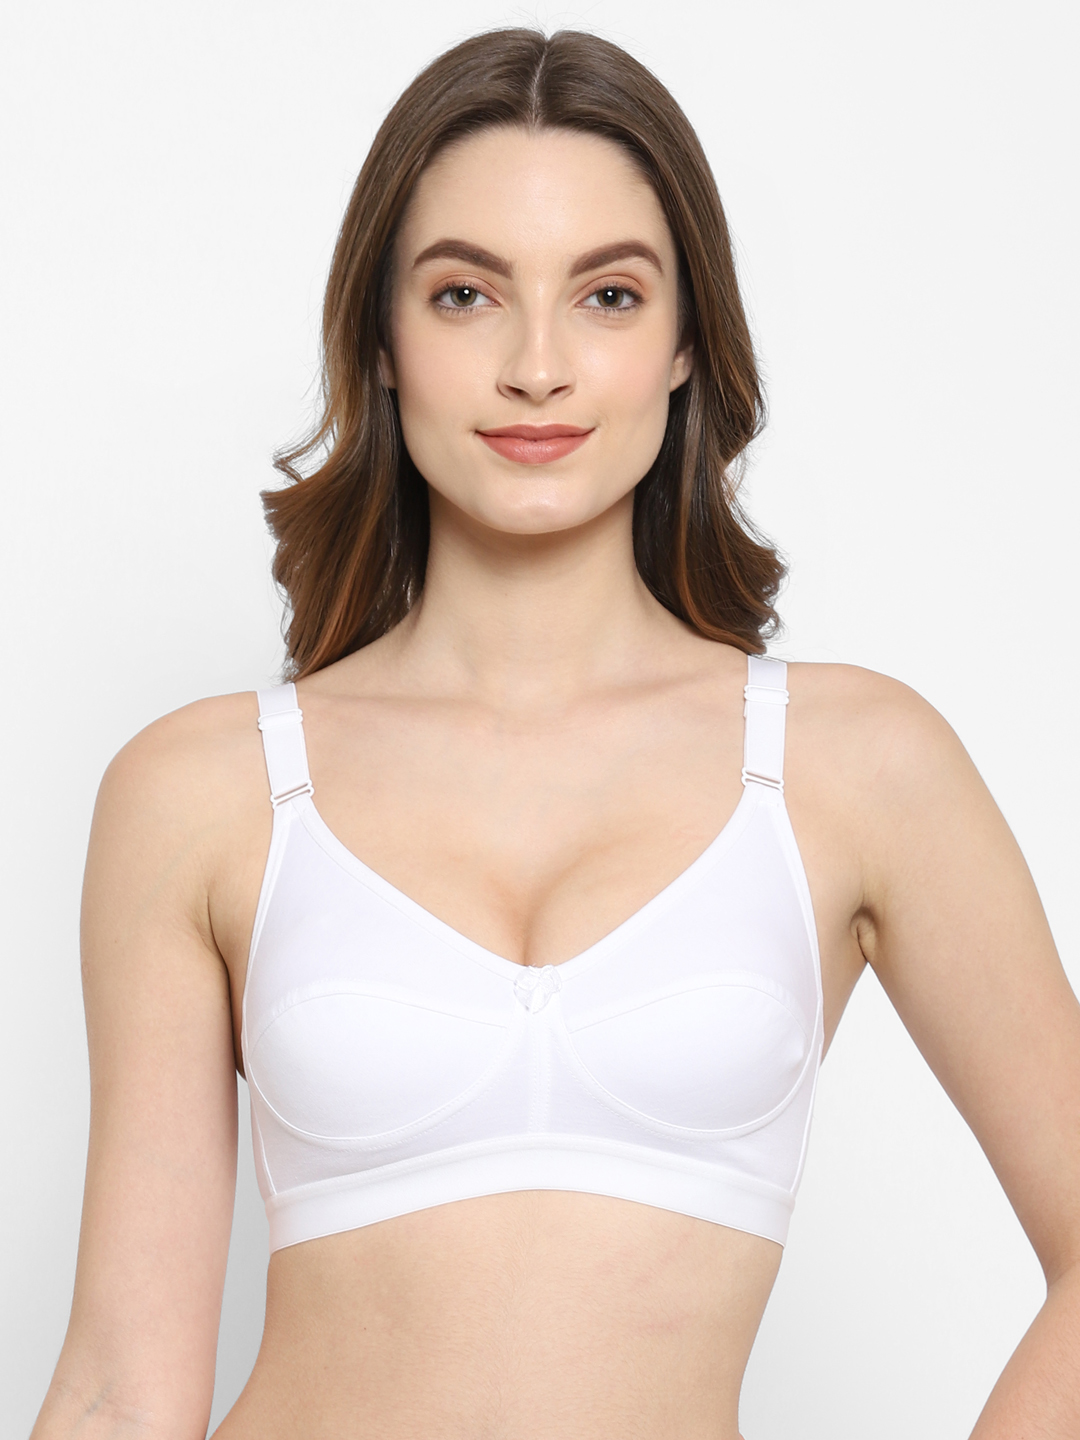 Buy Floret Padded Non Wired Full Coverage Push-Up Bra - Dcyan at